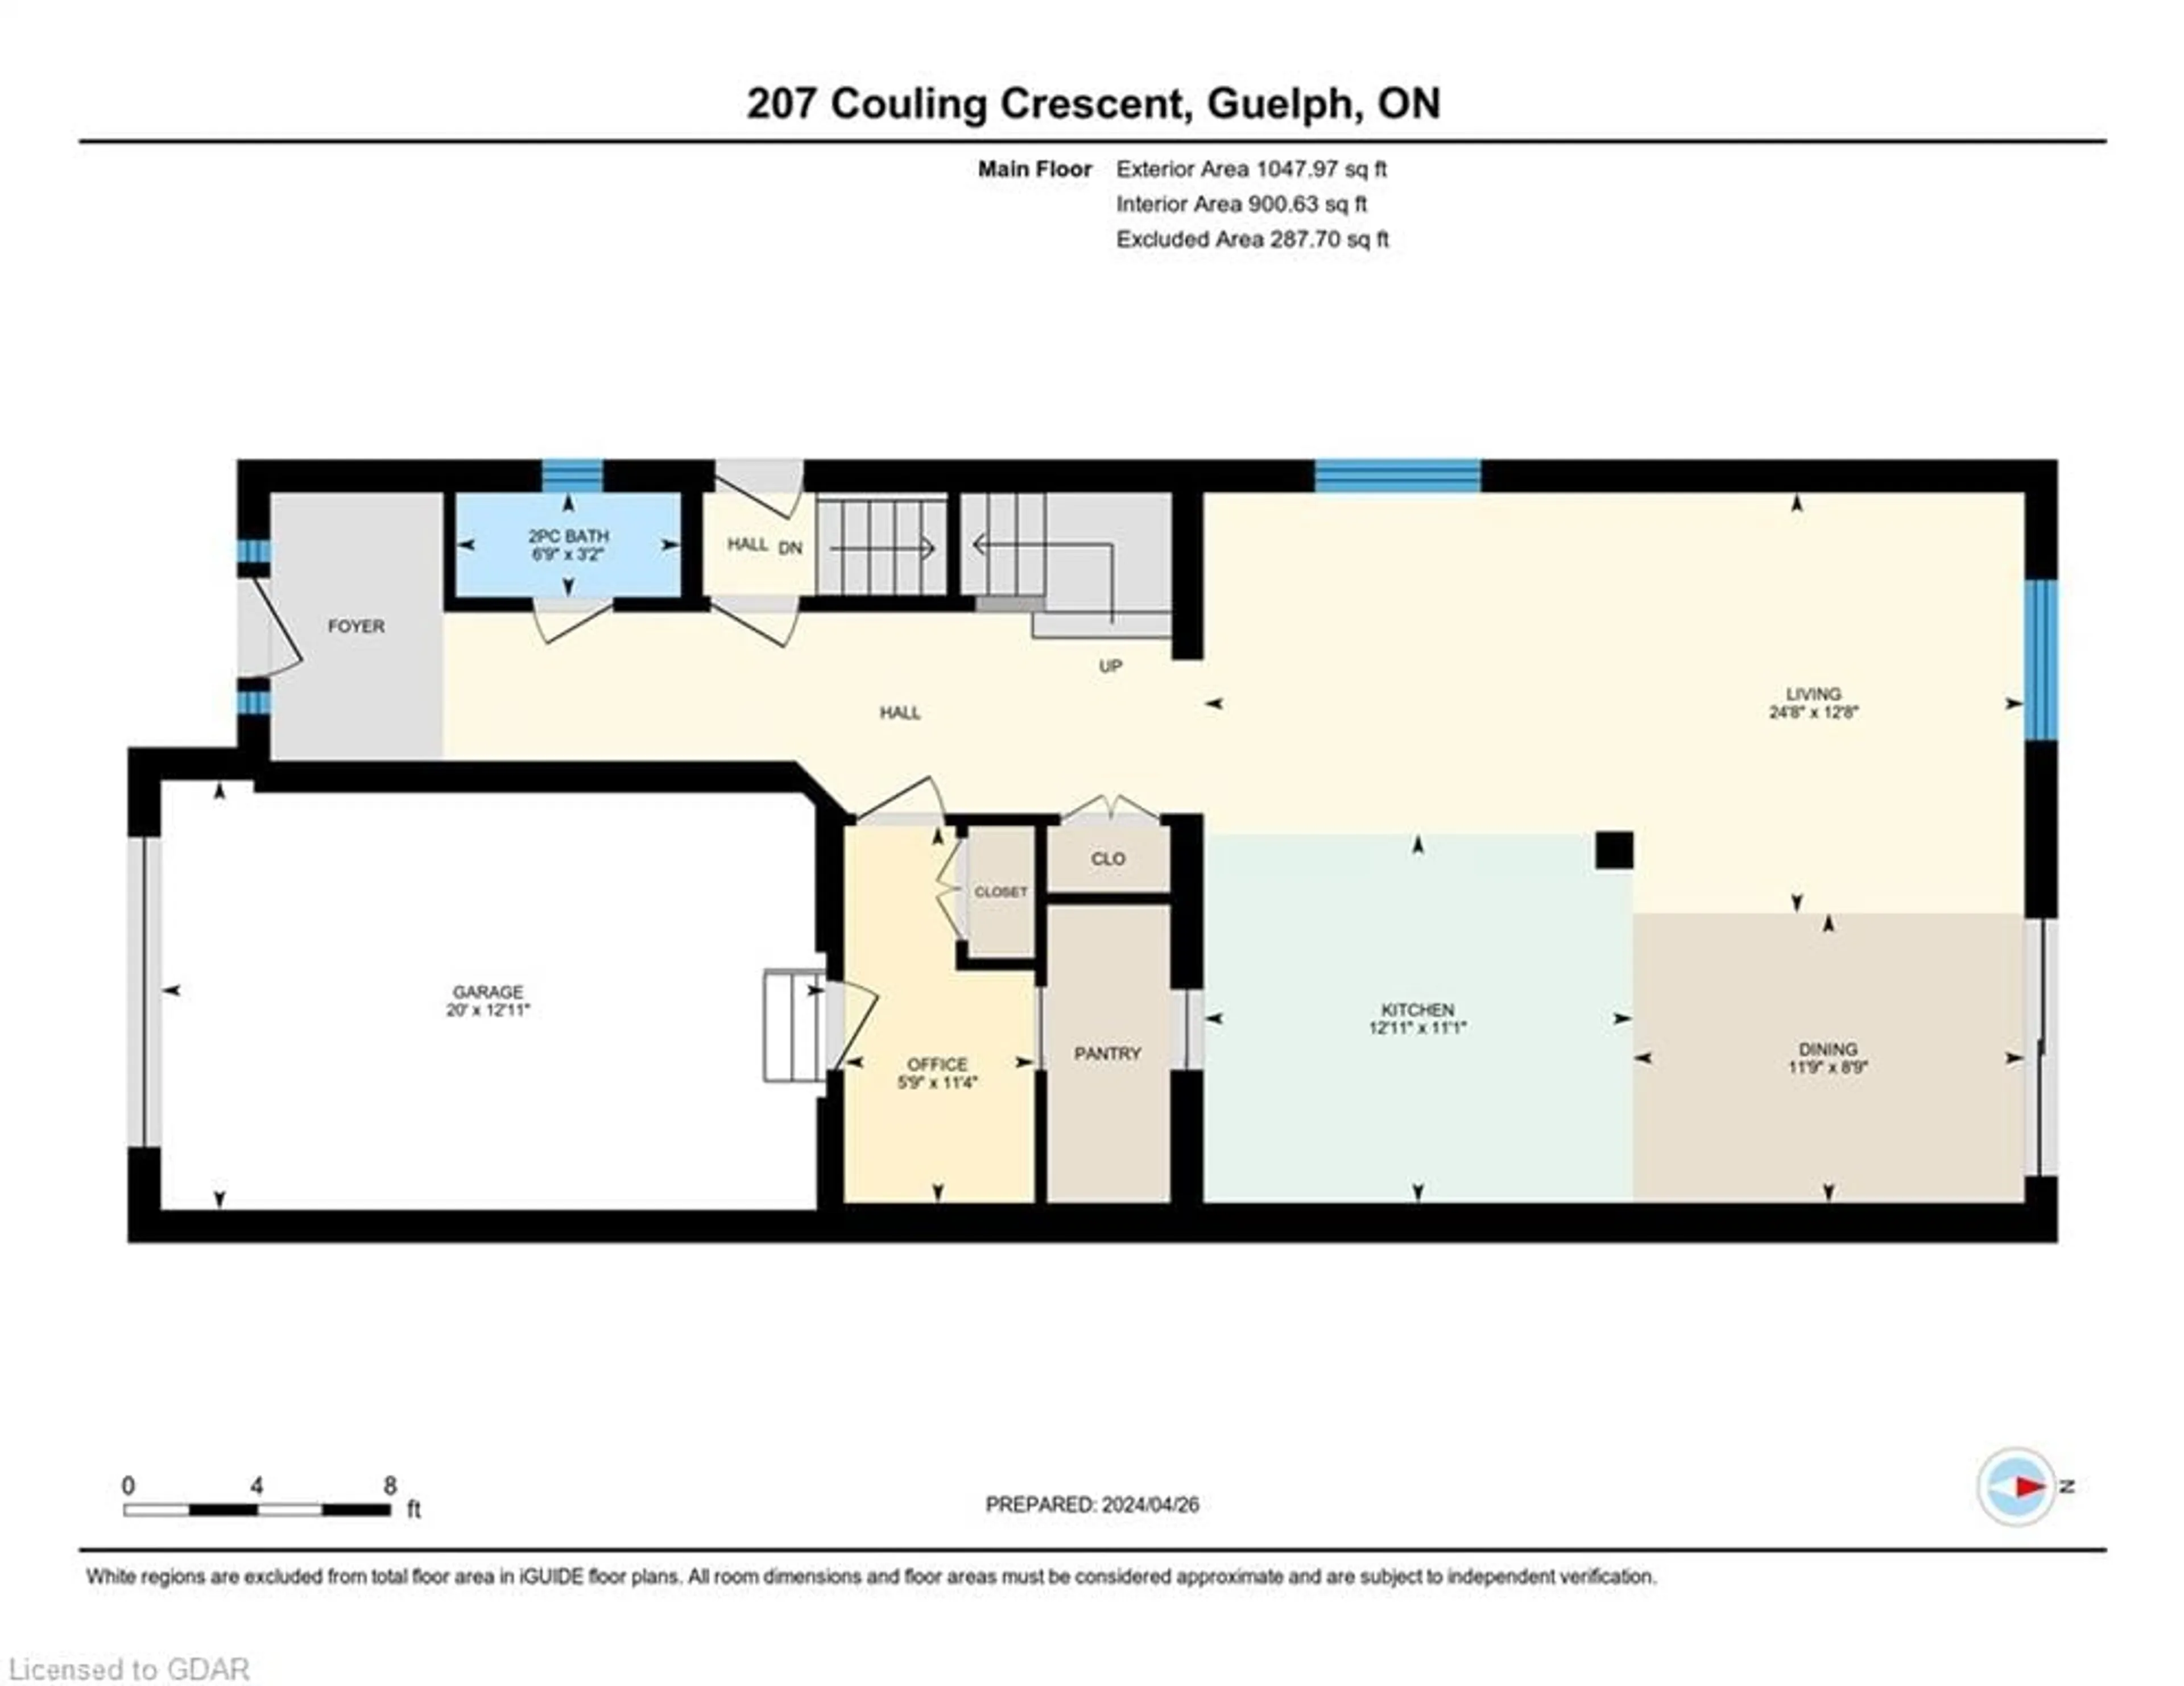 Floor plan for 207 Couling Cres, Guelph Ontario N1E 0L4